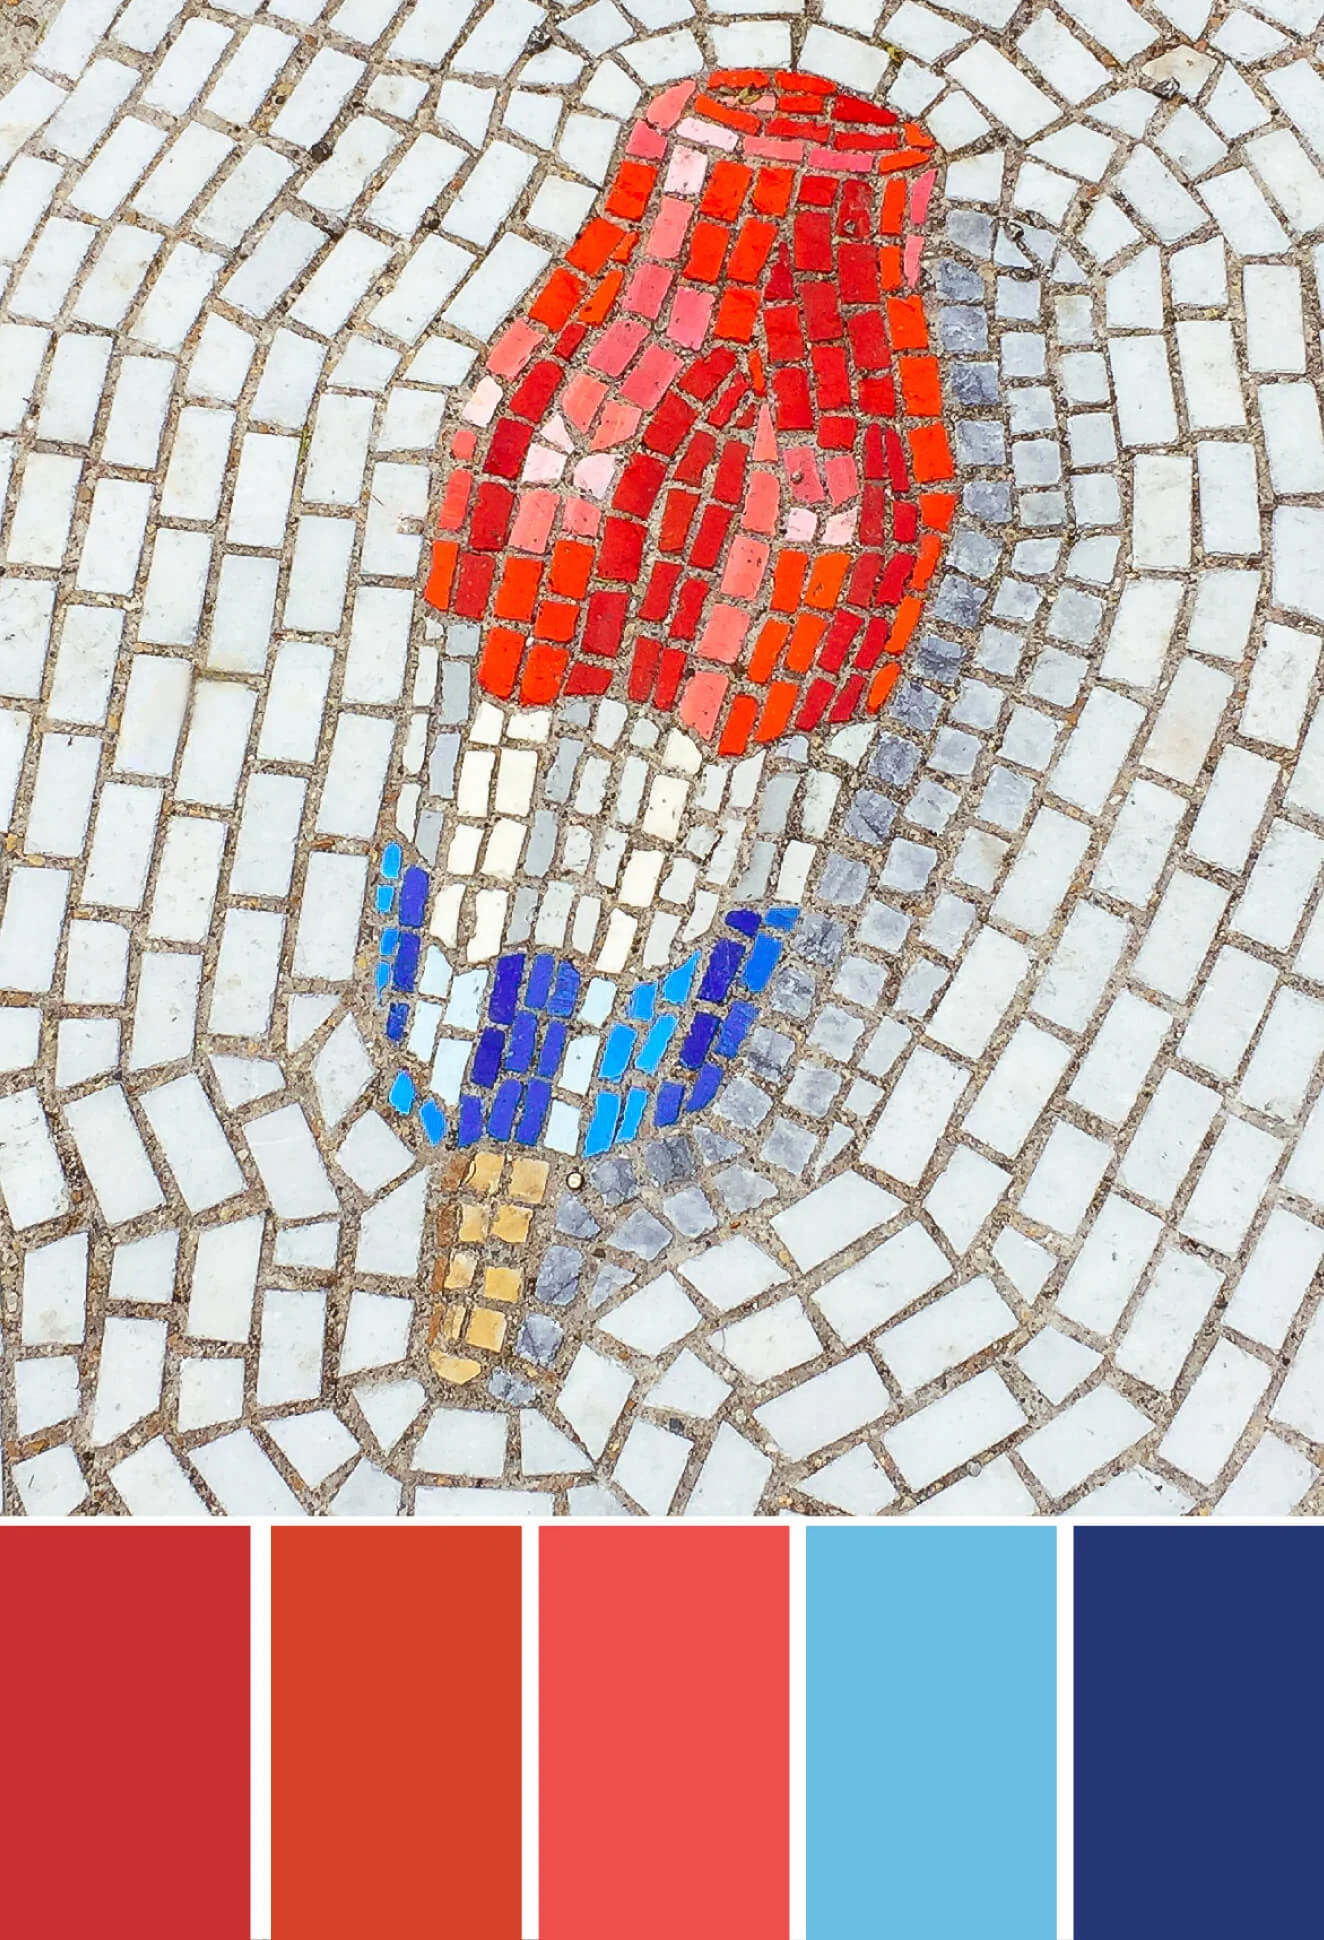 Summer color palette inspiration: Bomb Pops. Try this summer-inspired color palette on Fourth of July decorations, cards, scrapbooking, summer wedding color palettes, birthday parties and more (pothole art by Jim Bachor) #Colorize #ABColorPalette #ad